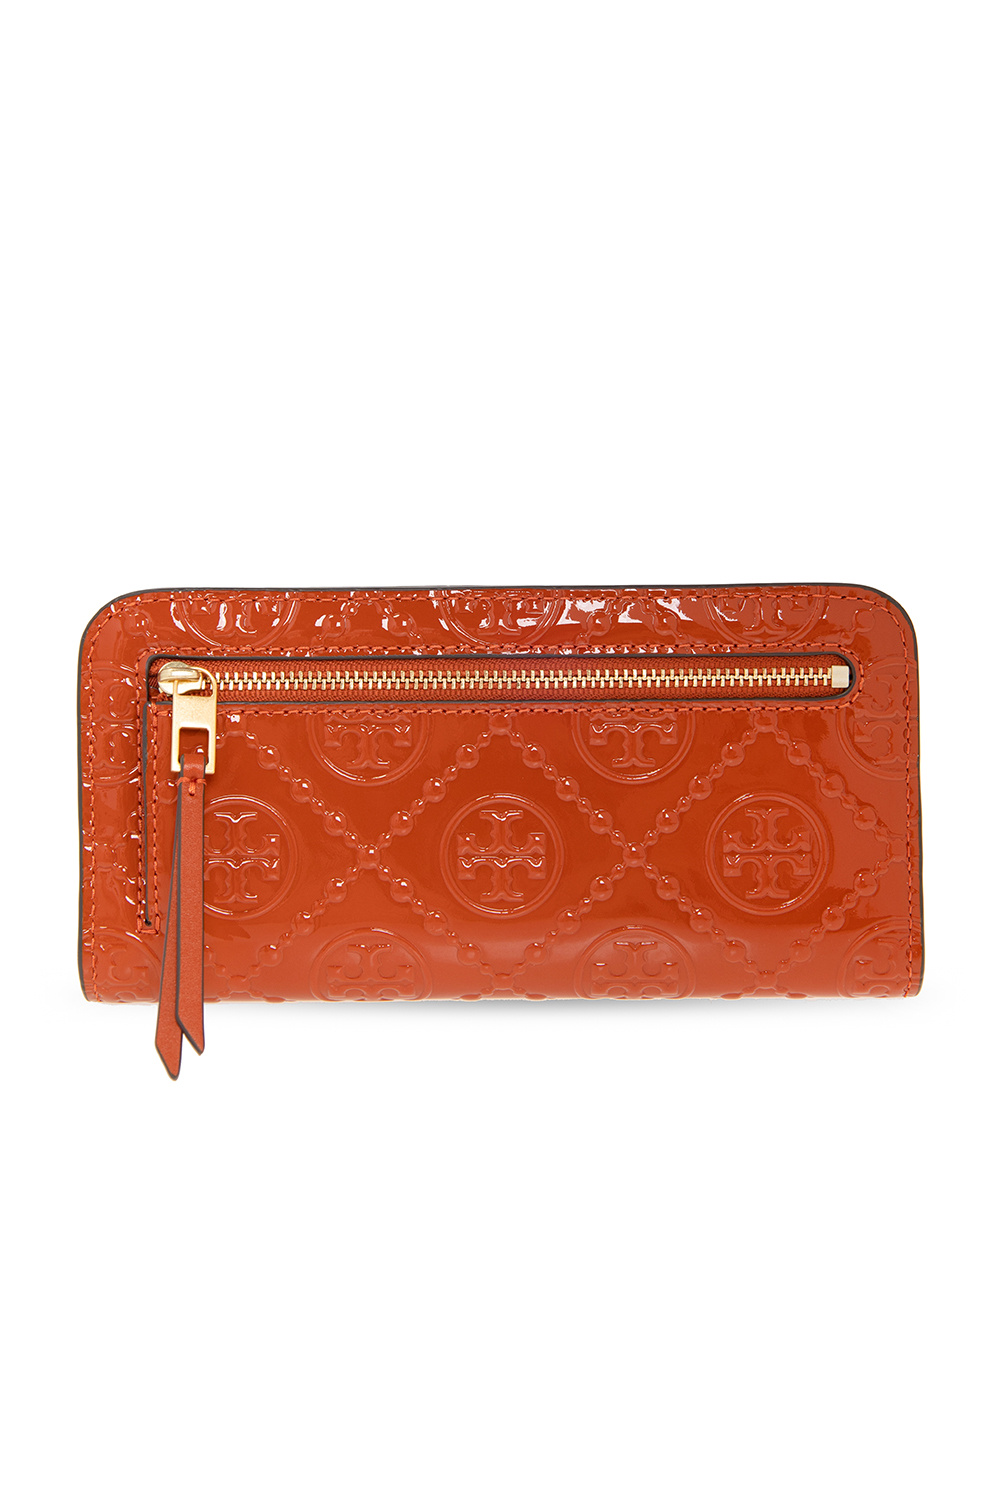 Tory Burch the hottest trend of the season